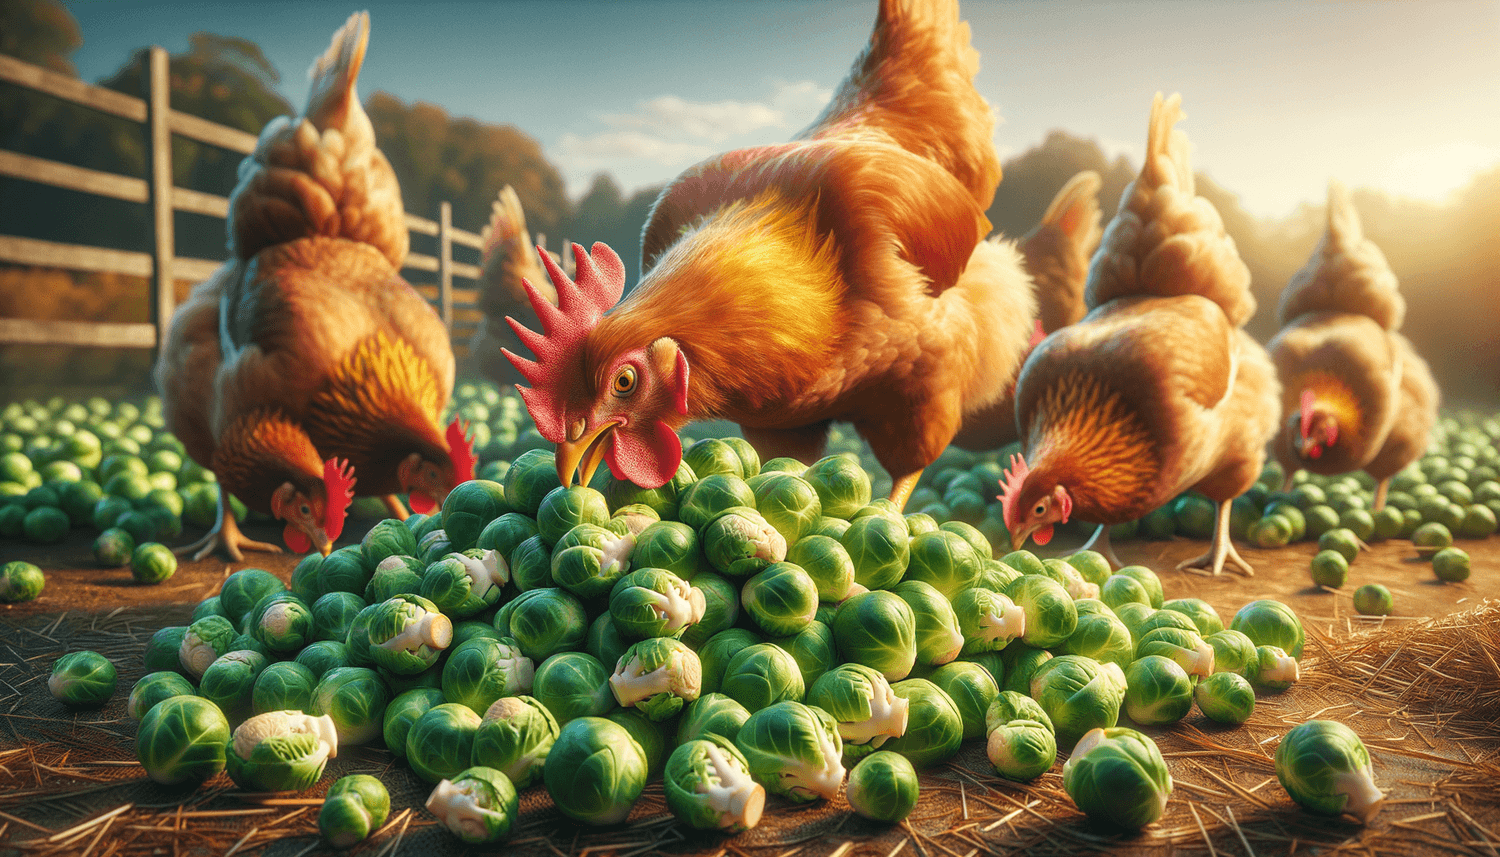 Can Chickens Eat Raw Brussel Sprouts?